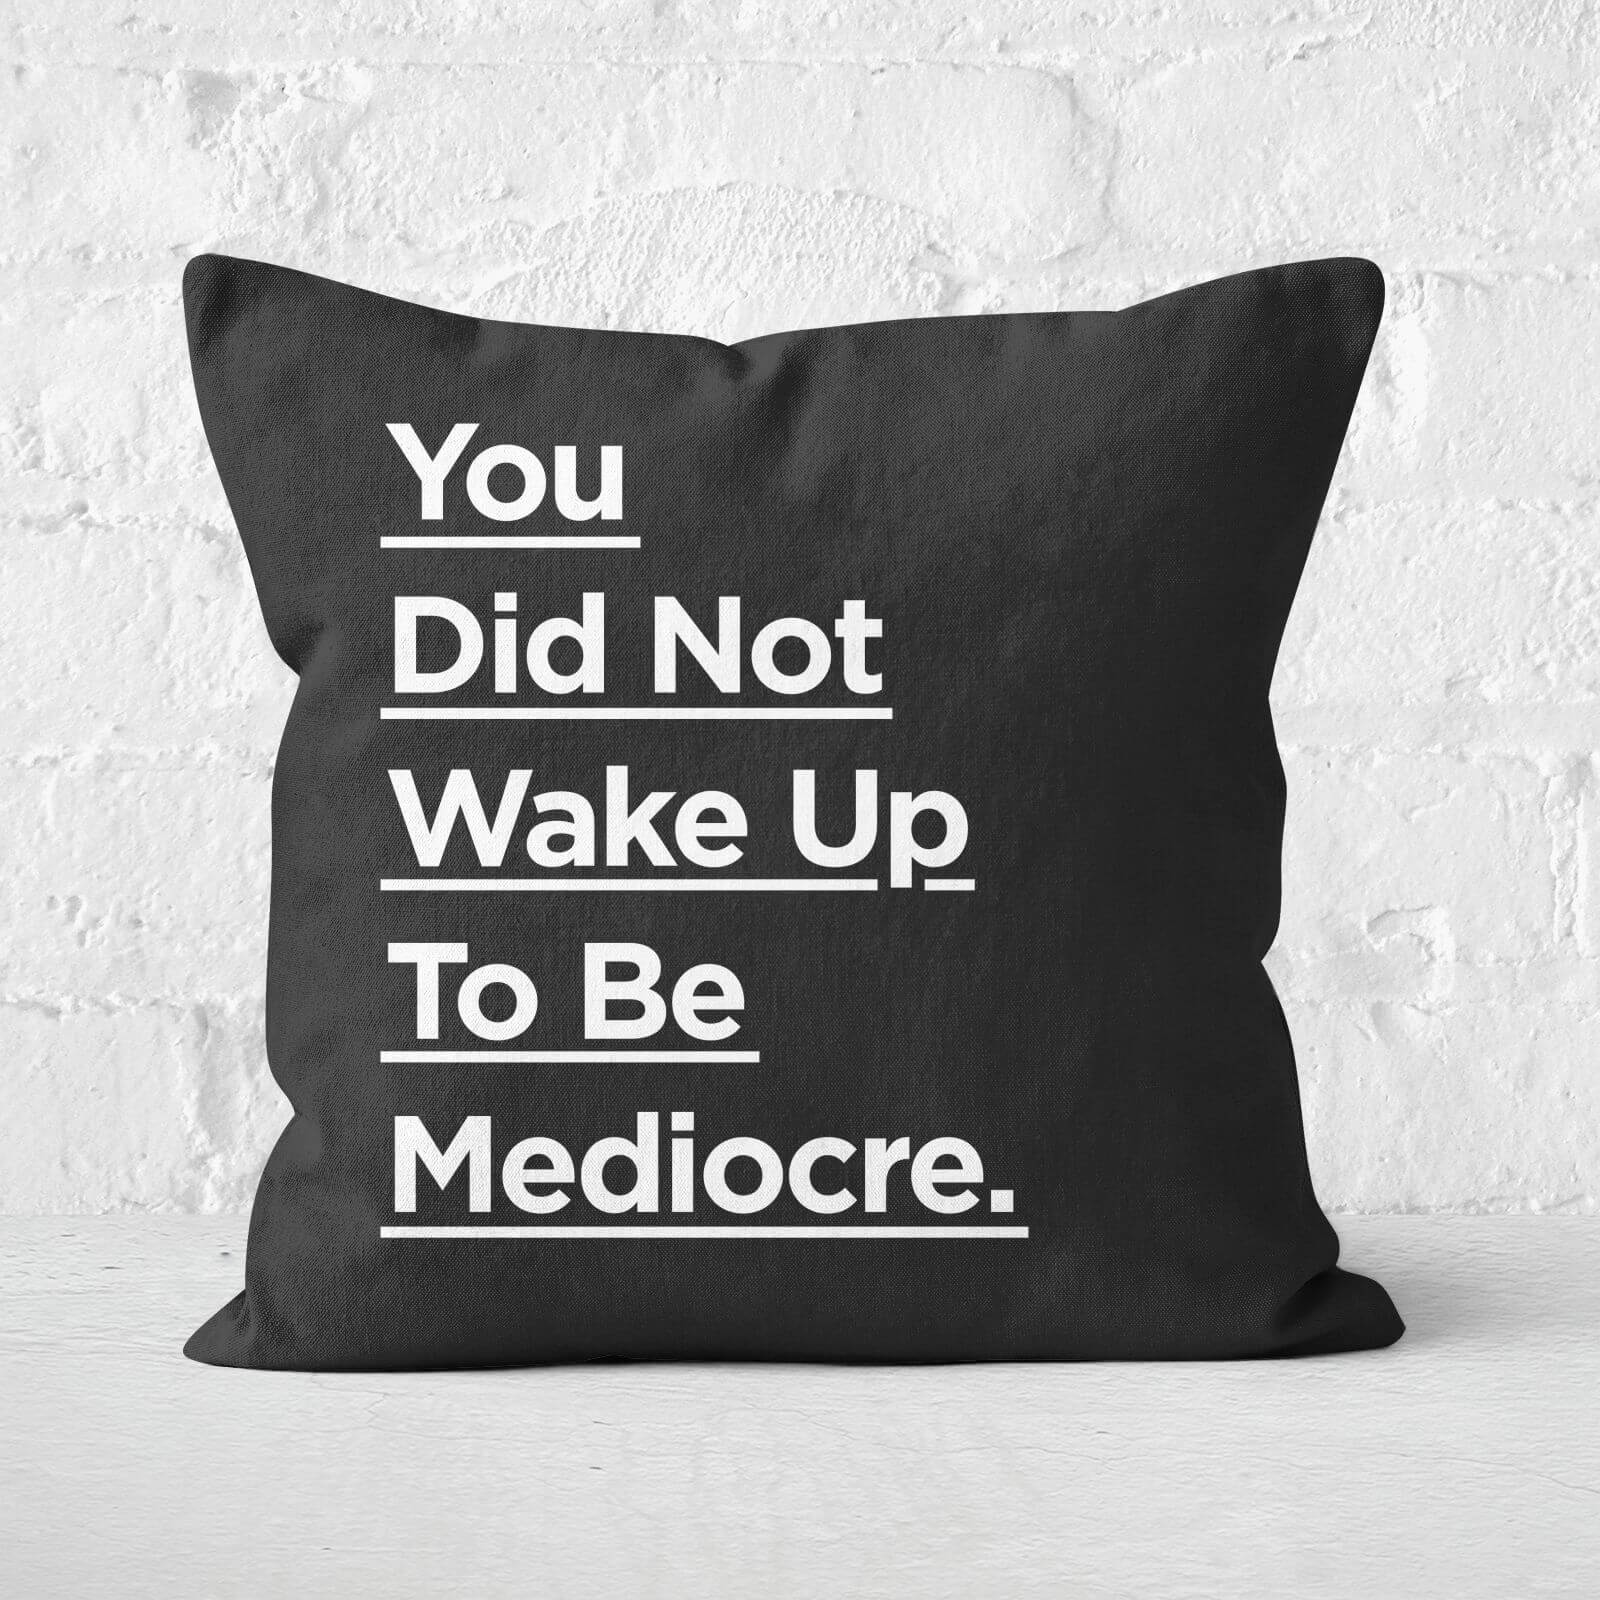 The Motivated Type To Be Mediocre. Square Cushion - 60x60cm - Soft Touch